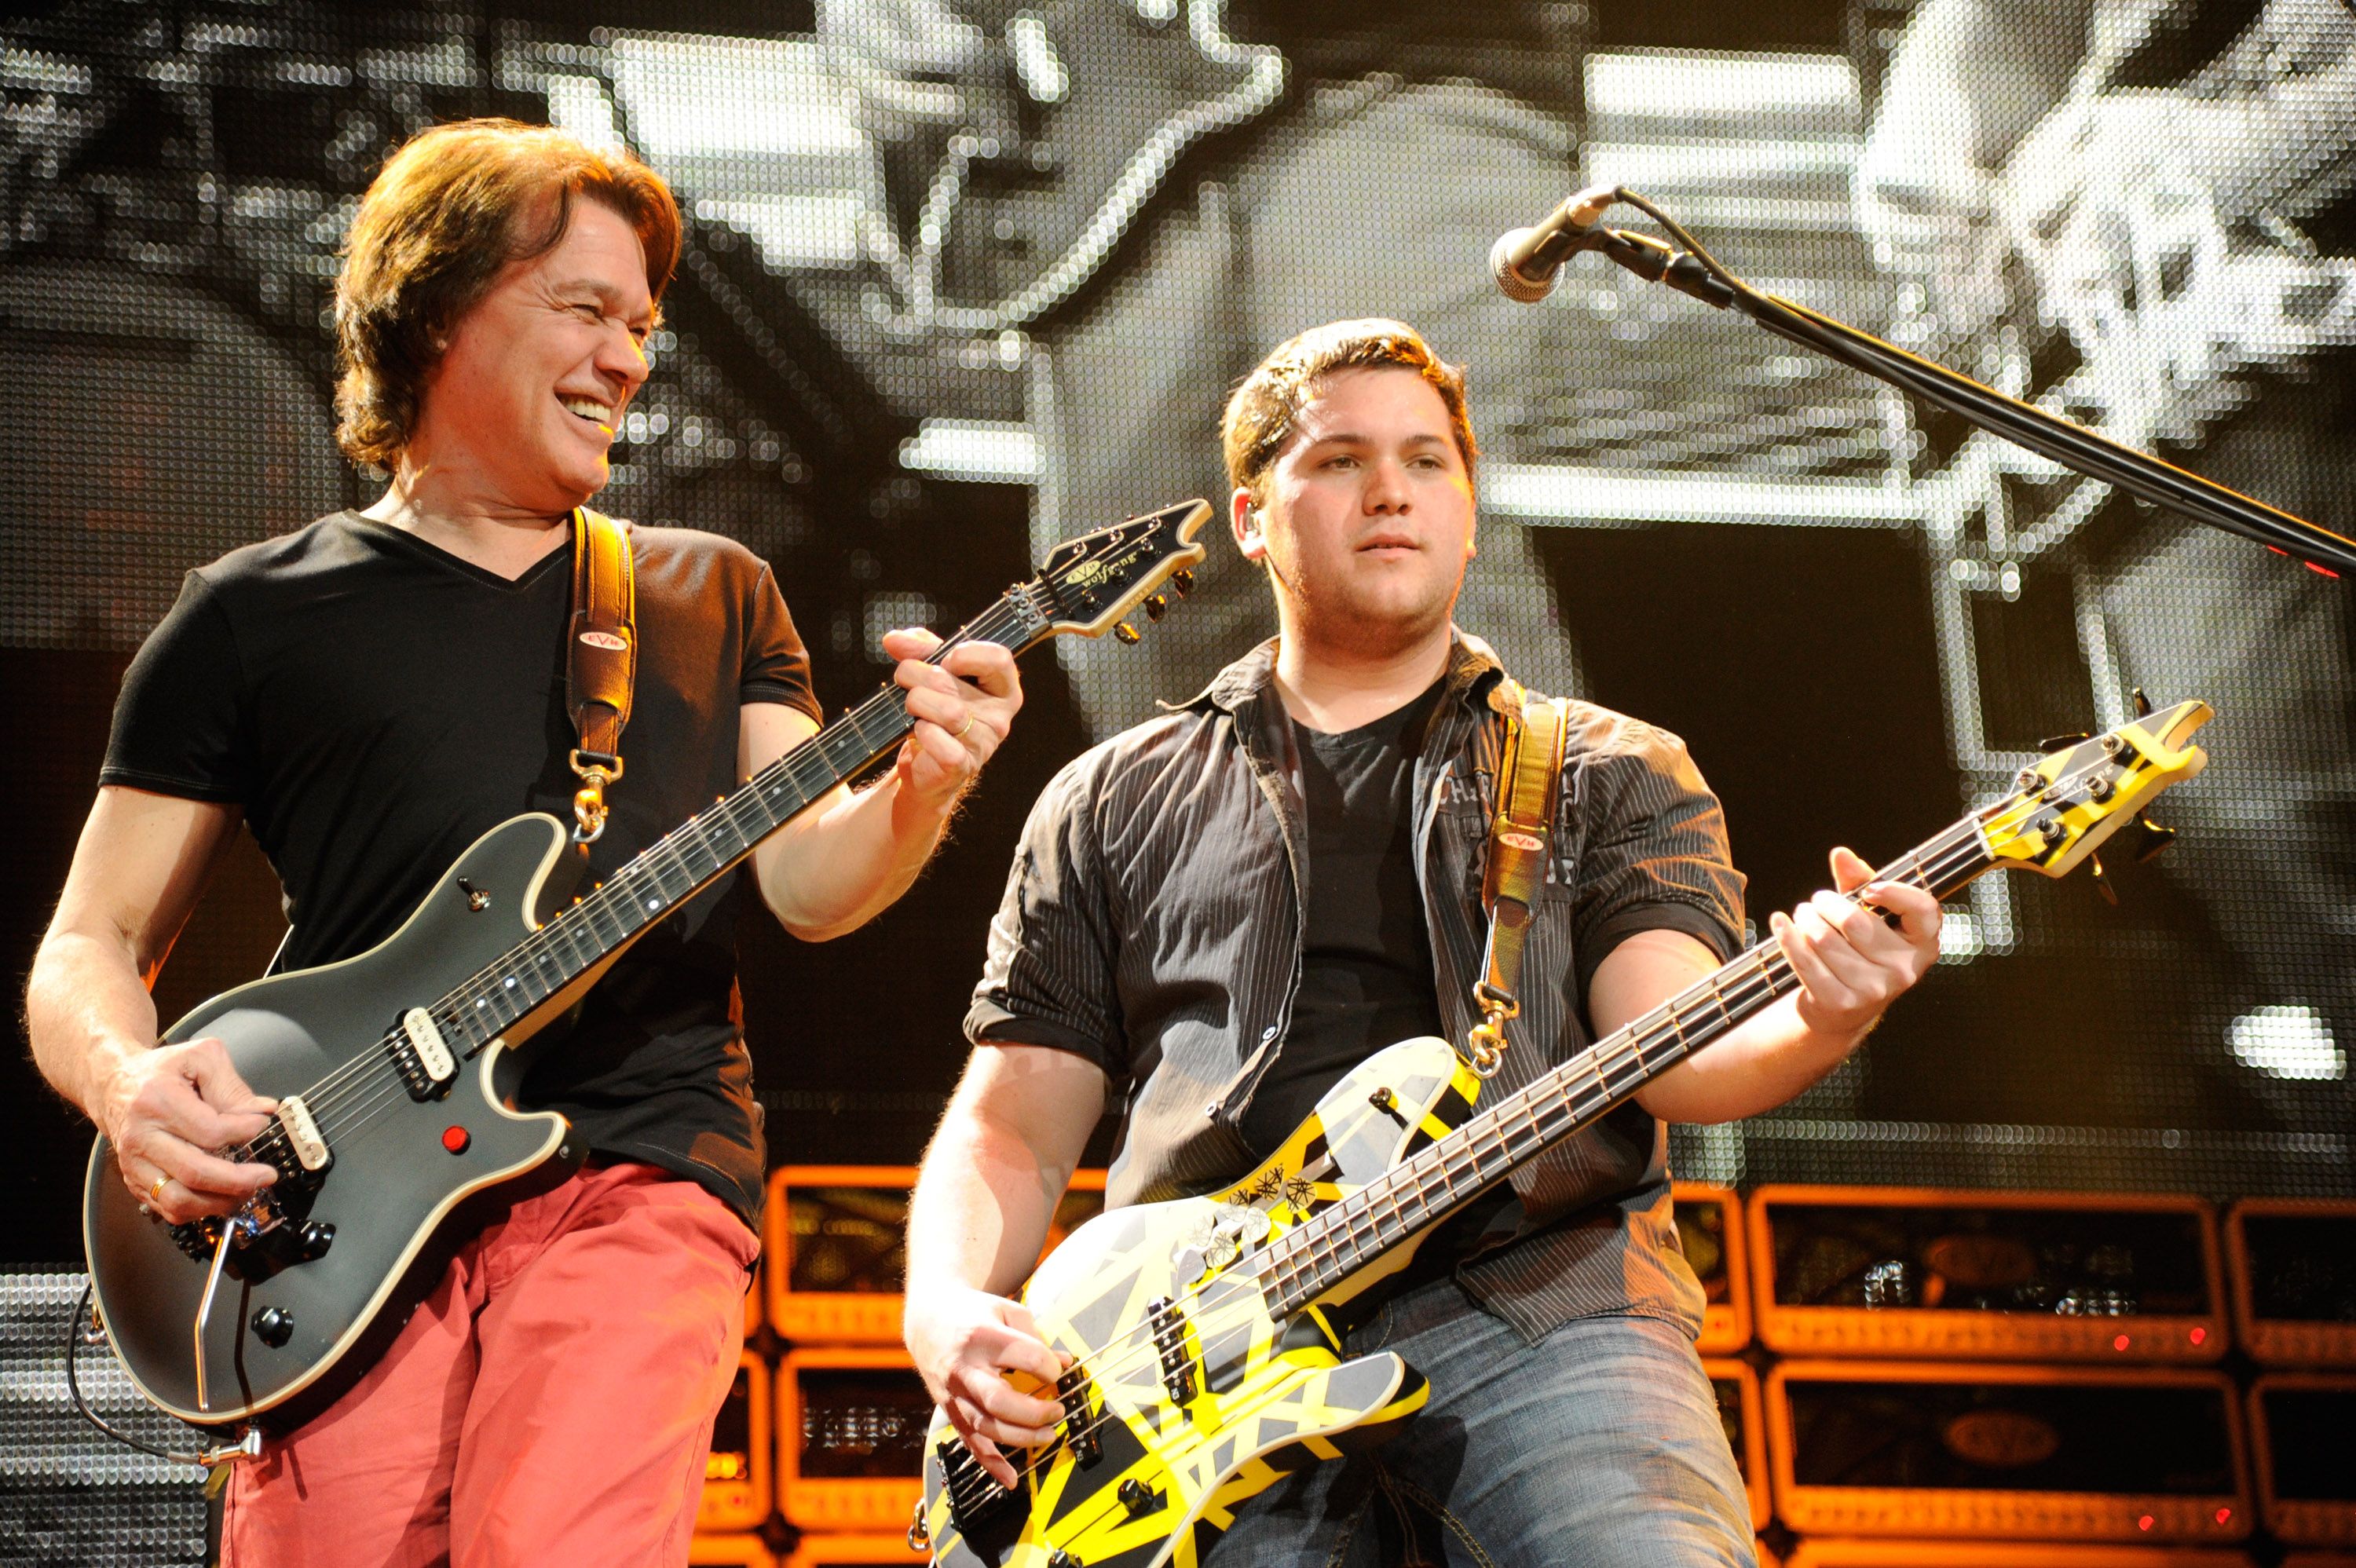 Eddie Van Halen and Wolfgang Van Halen of Van Halen perform at "A Different Kind of Truth" tour at Madison Square Garden on February 28, 2012 | Photo: Getty Images